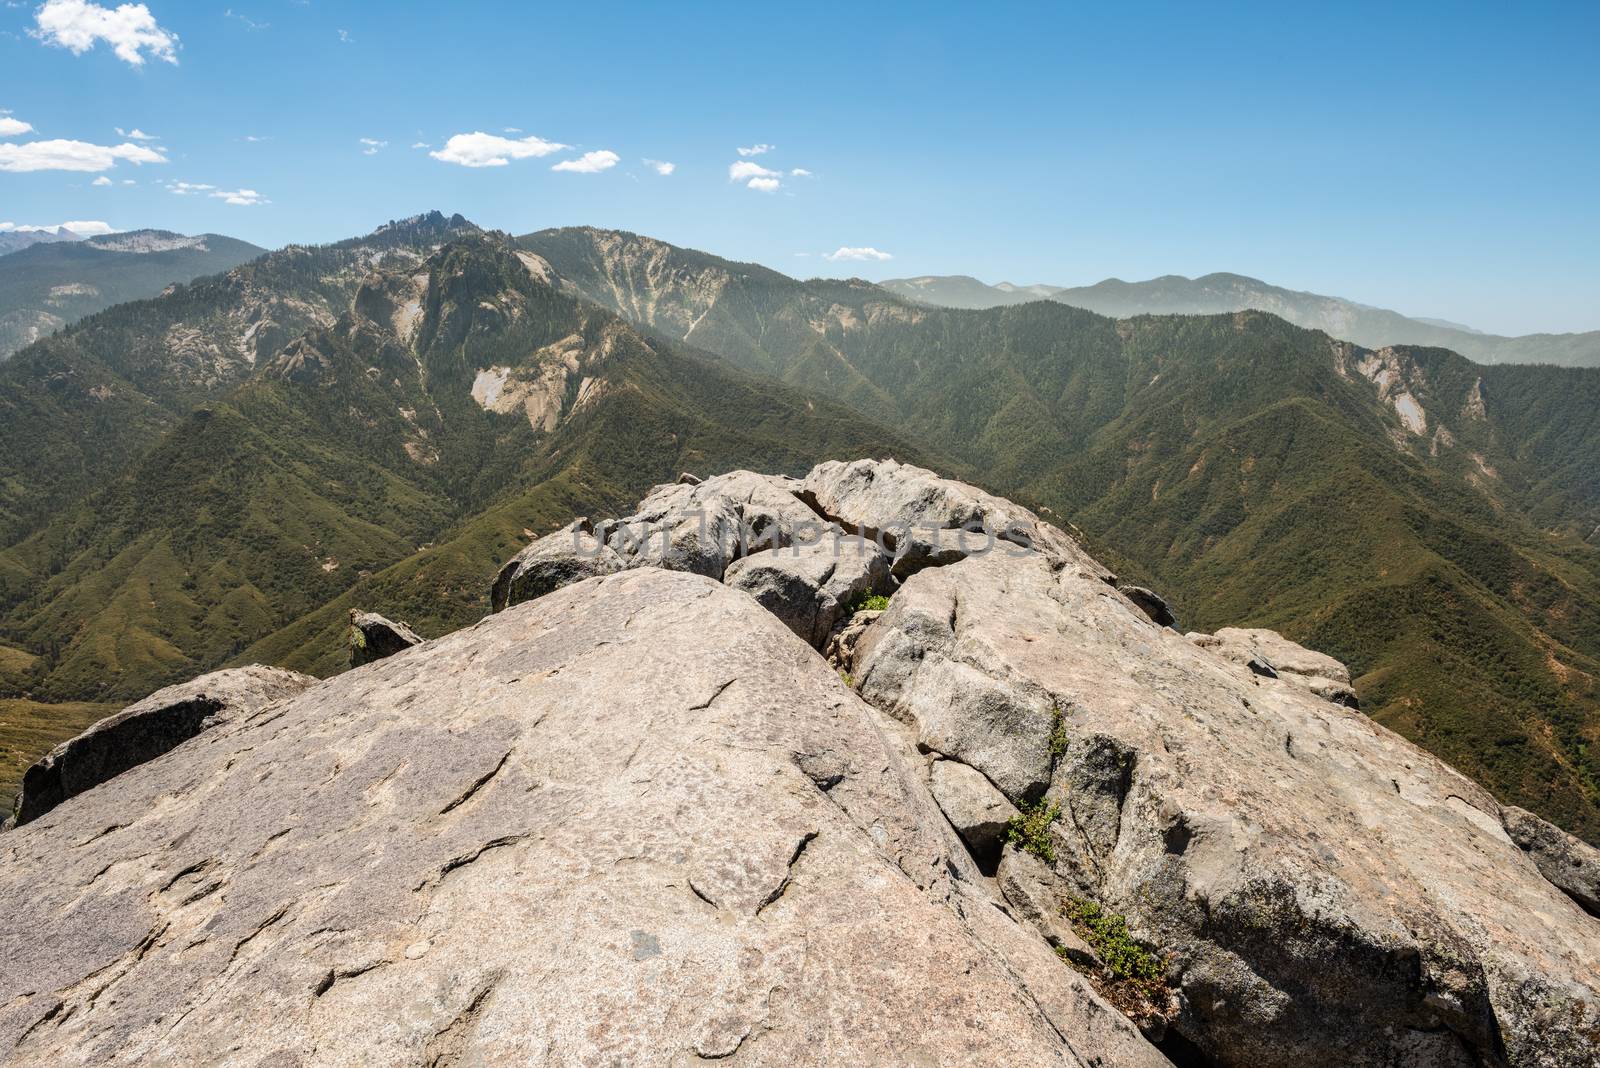 View from Moro Rock in Sequoia National Park, California by Njean